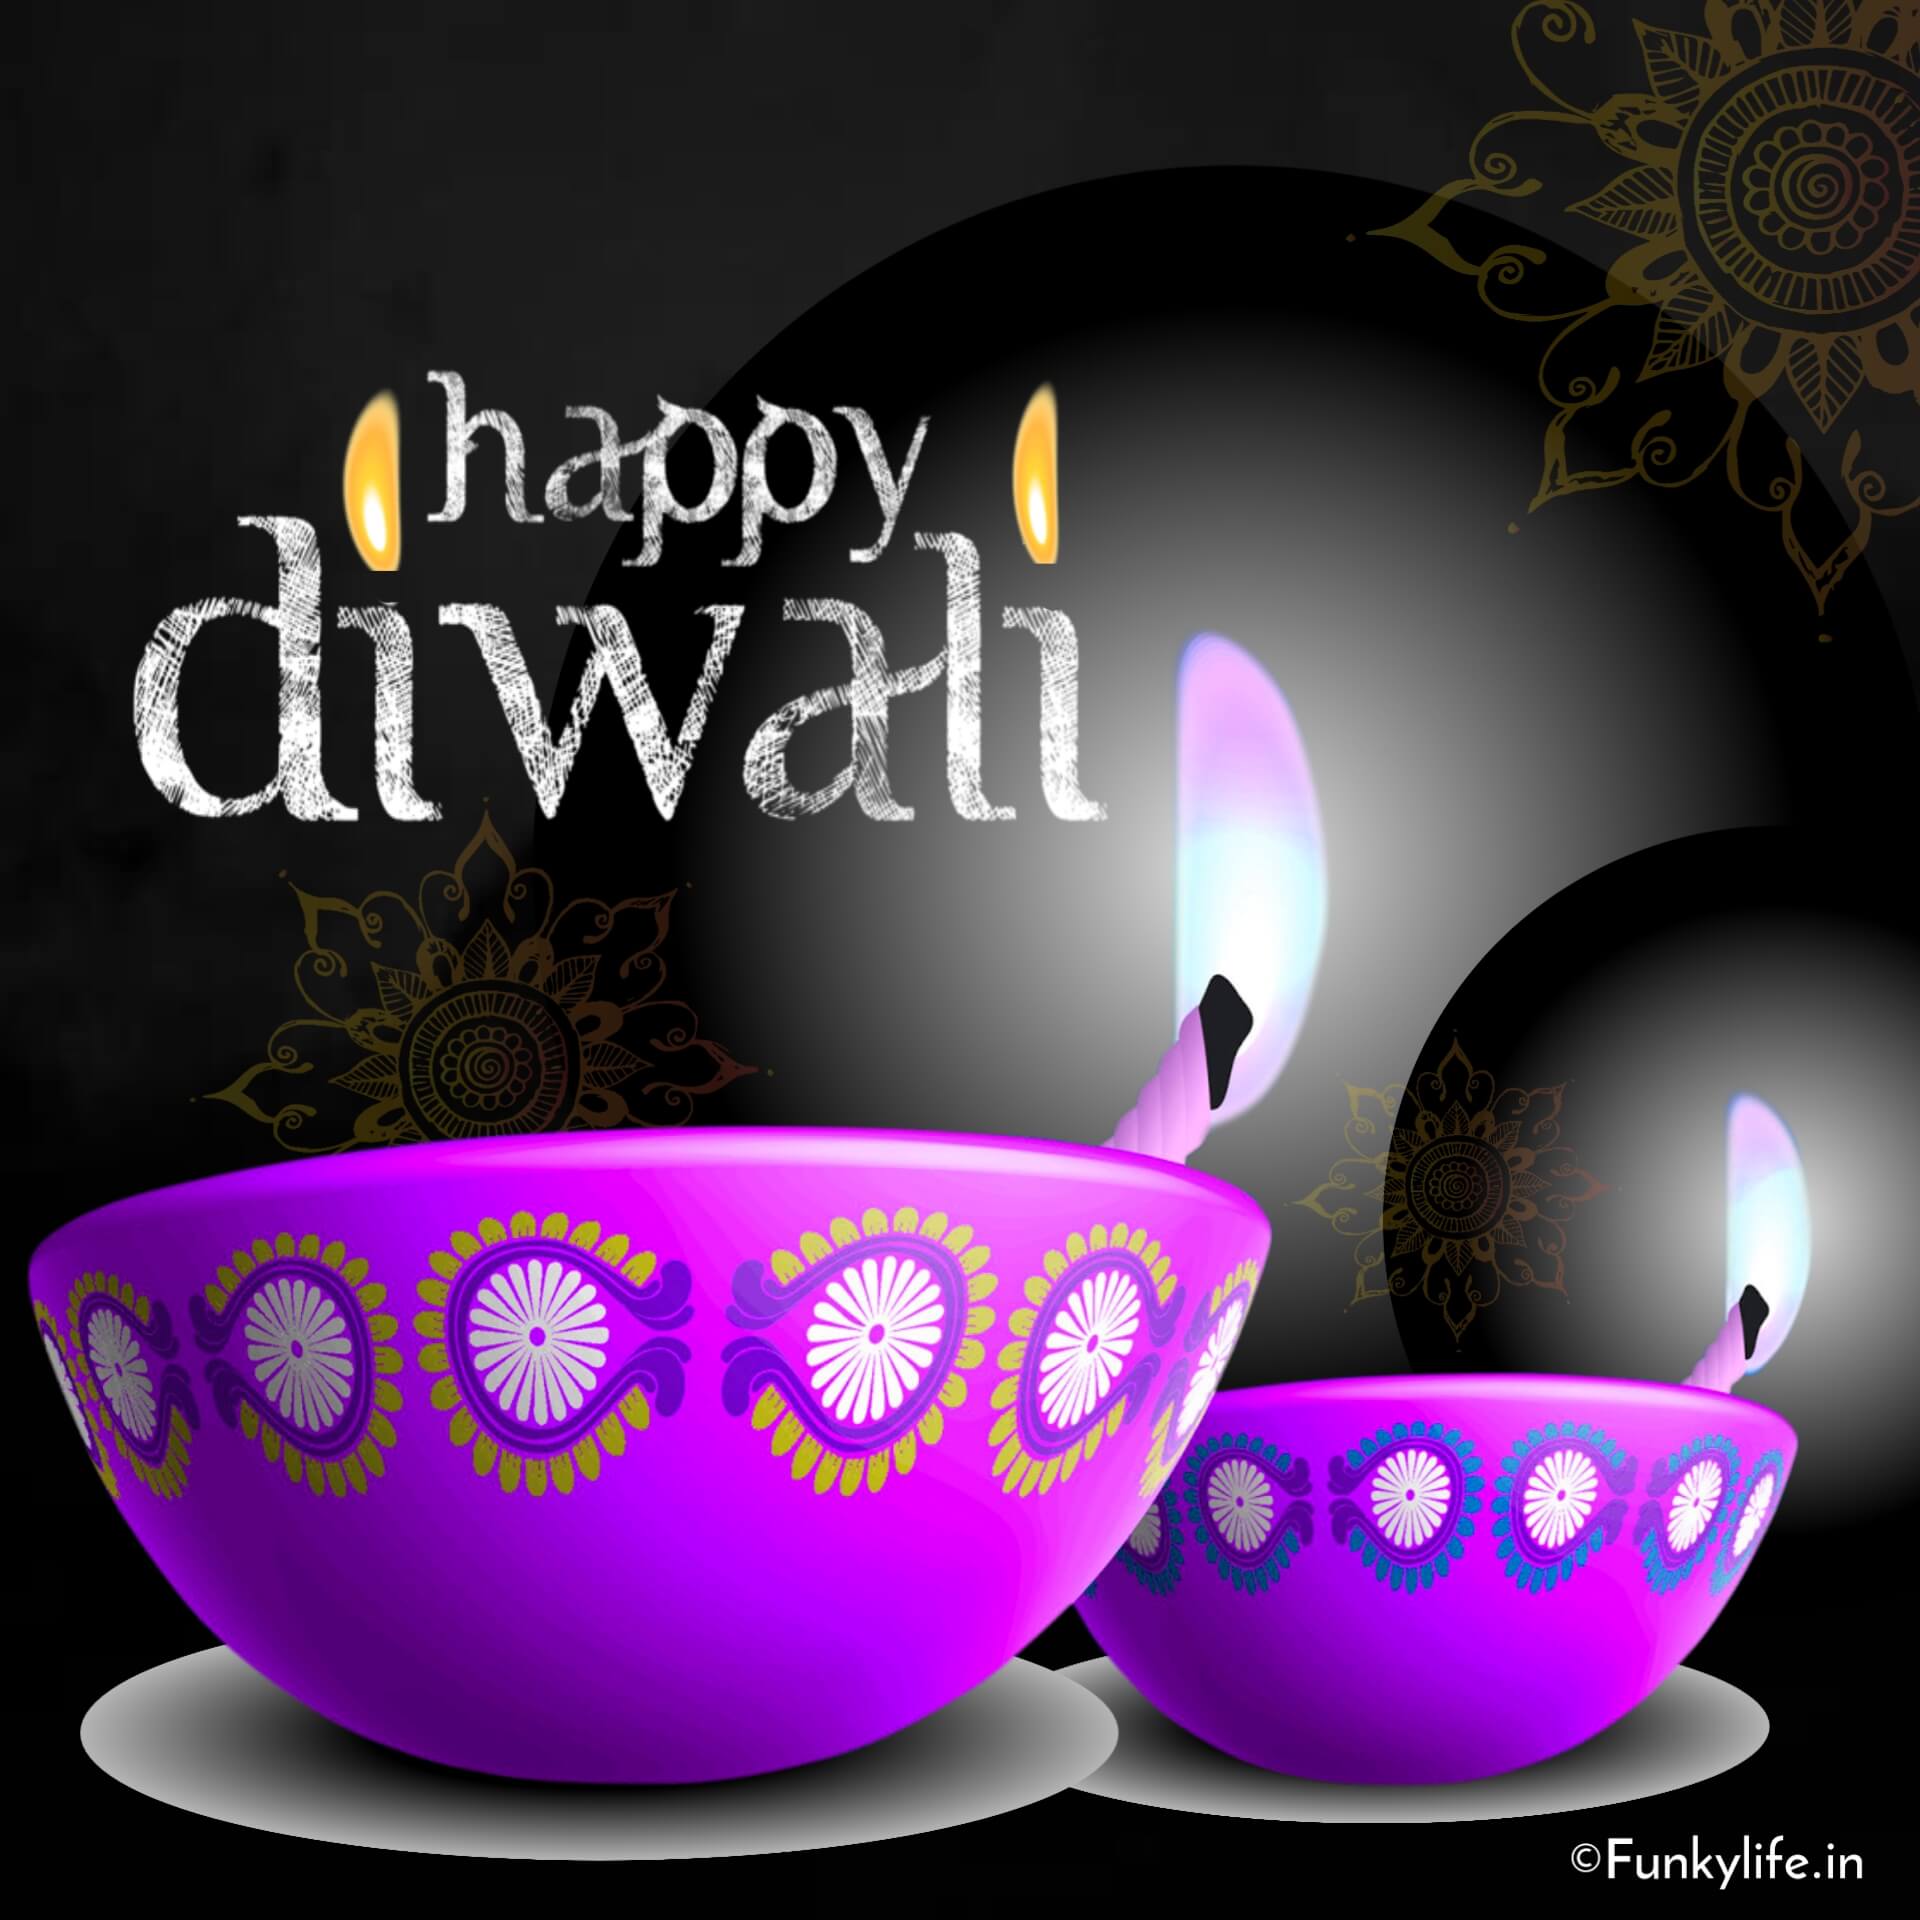 Best Happy Diwali Image, Photo and Picture 2021